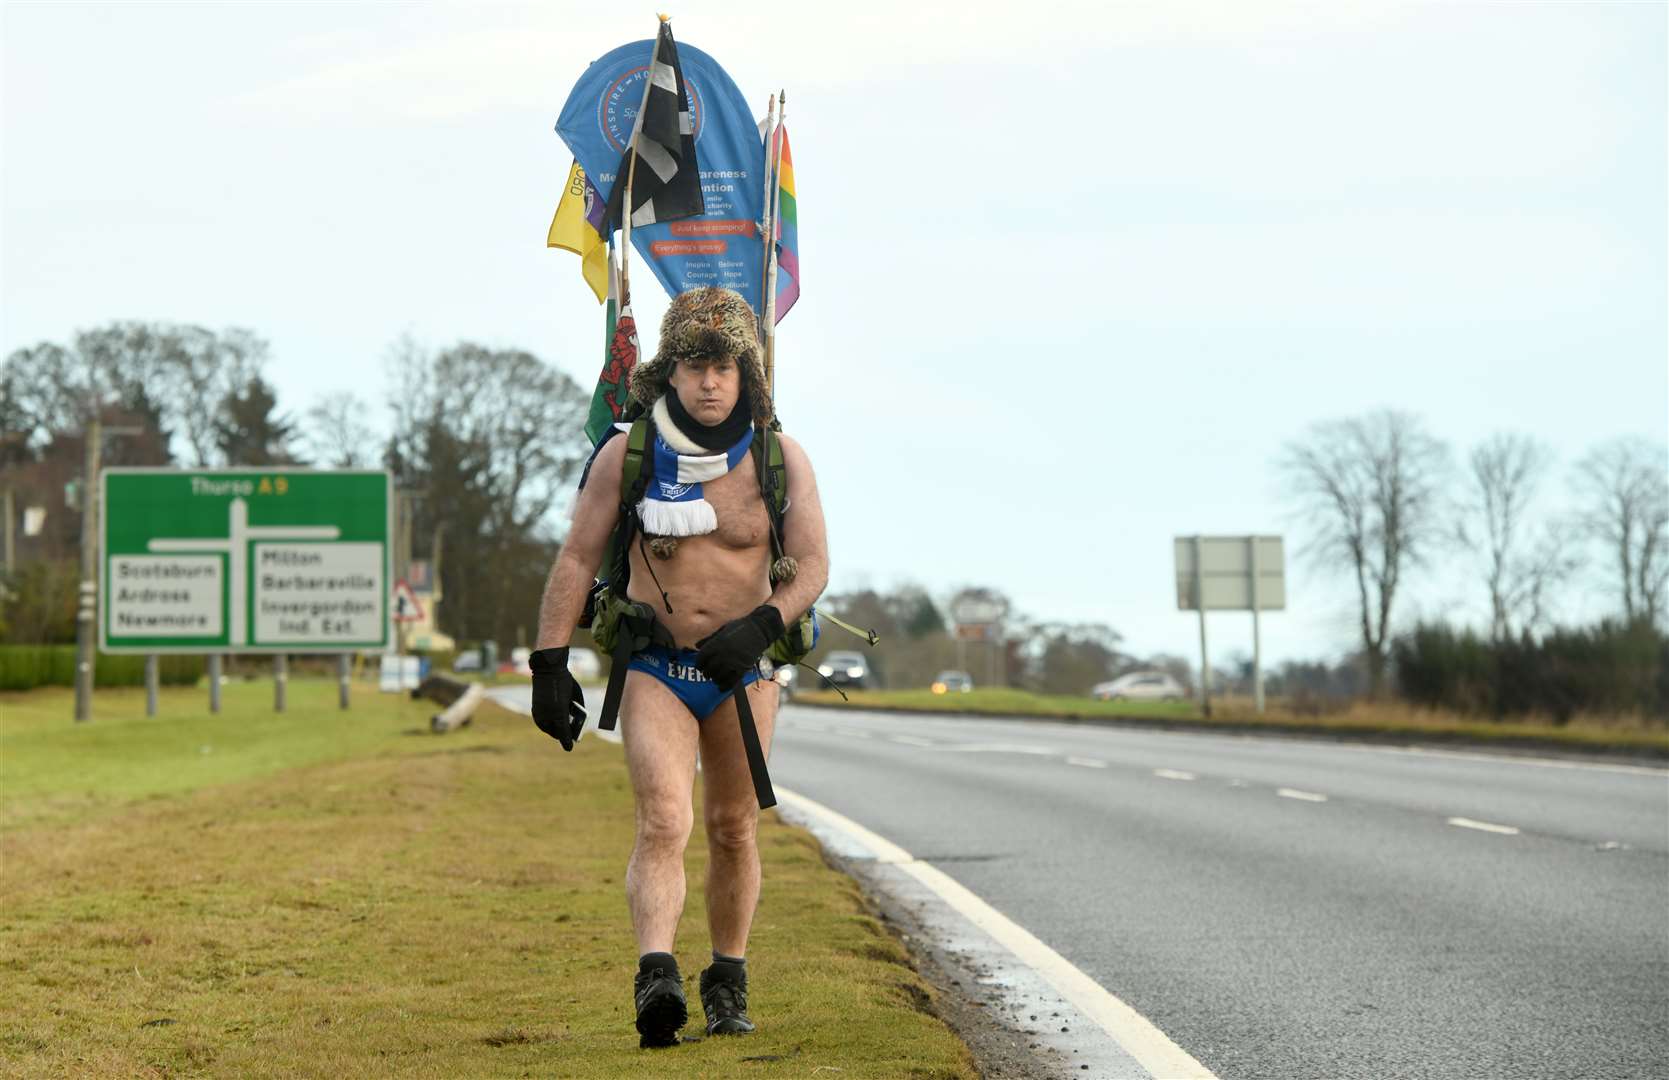 Michael Cullen, better known to thousands as Speedo Mick, continued his stomp through the Highlands saying recent incidents on the Kessock Bridge have highlighted the need for mental health support – the key issue he aims to raise awareness about. Picture: James Mackenzie